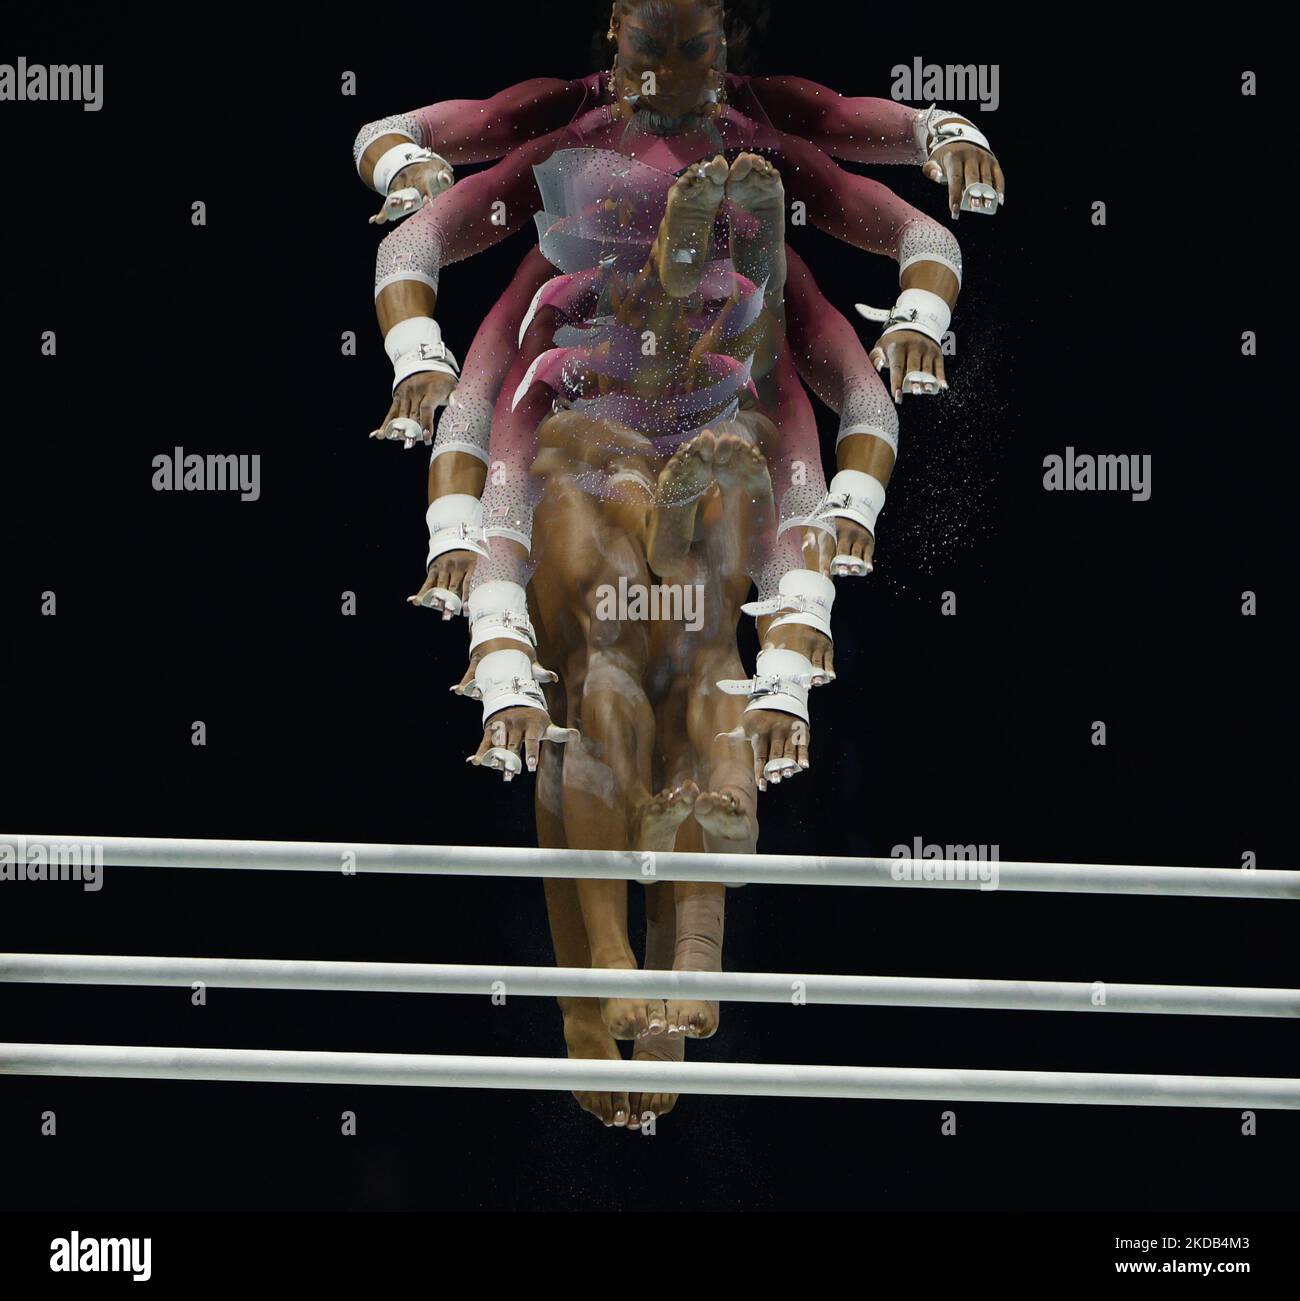 5th November 2022,  M&amp;S Bank Arena, Liverpool, England; 2022 World Artistic Gymnastics Championships Finals; Women's Individual All-Around Final Uneven Bars - Shilese Jones (USA) multiple exposure Stock Photo